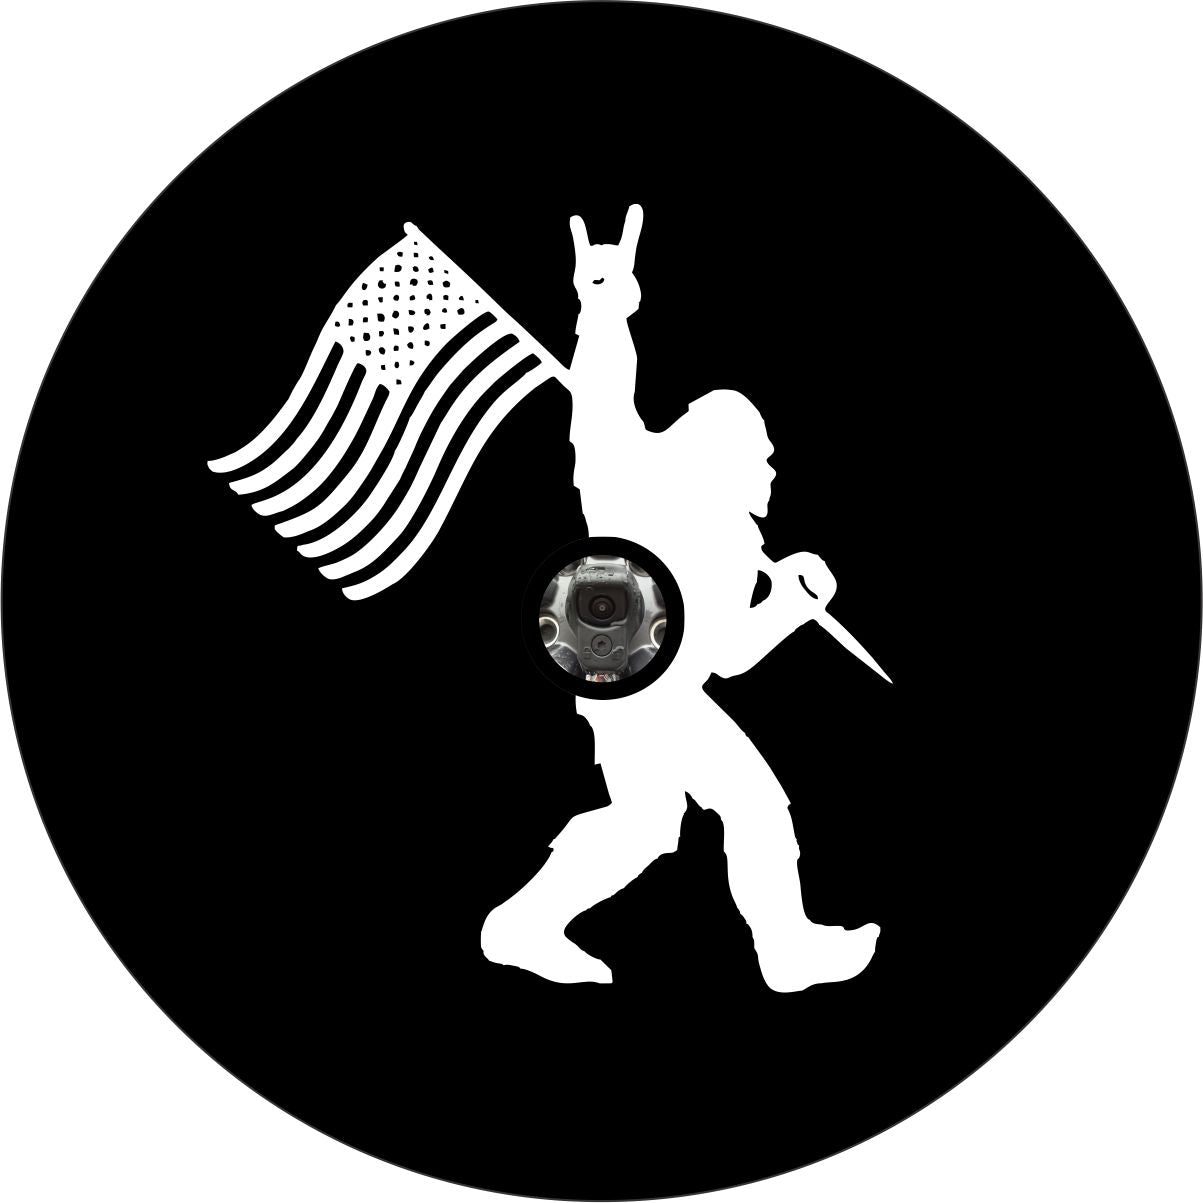 Spare tire cover design of Sasquatch walking by holding the American flag and throwing up the rock on sign with his hand and a hole for a back up camera.